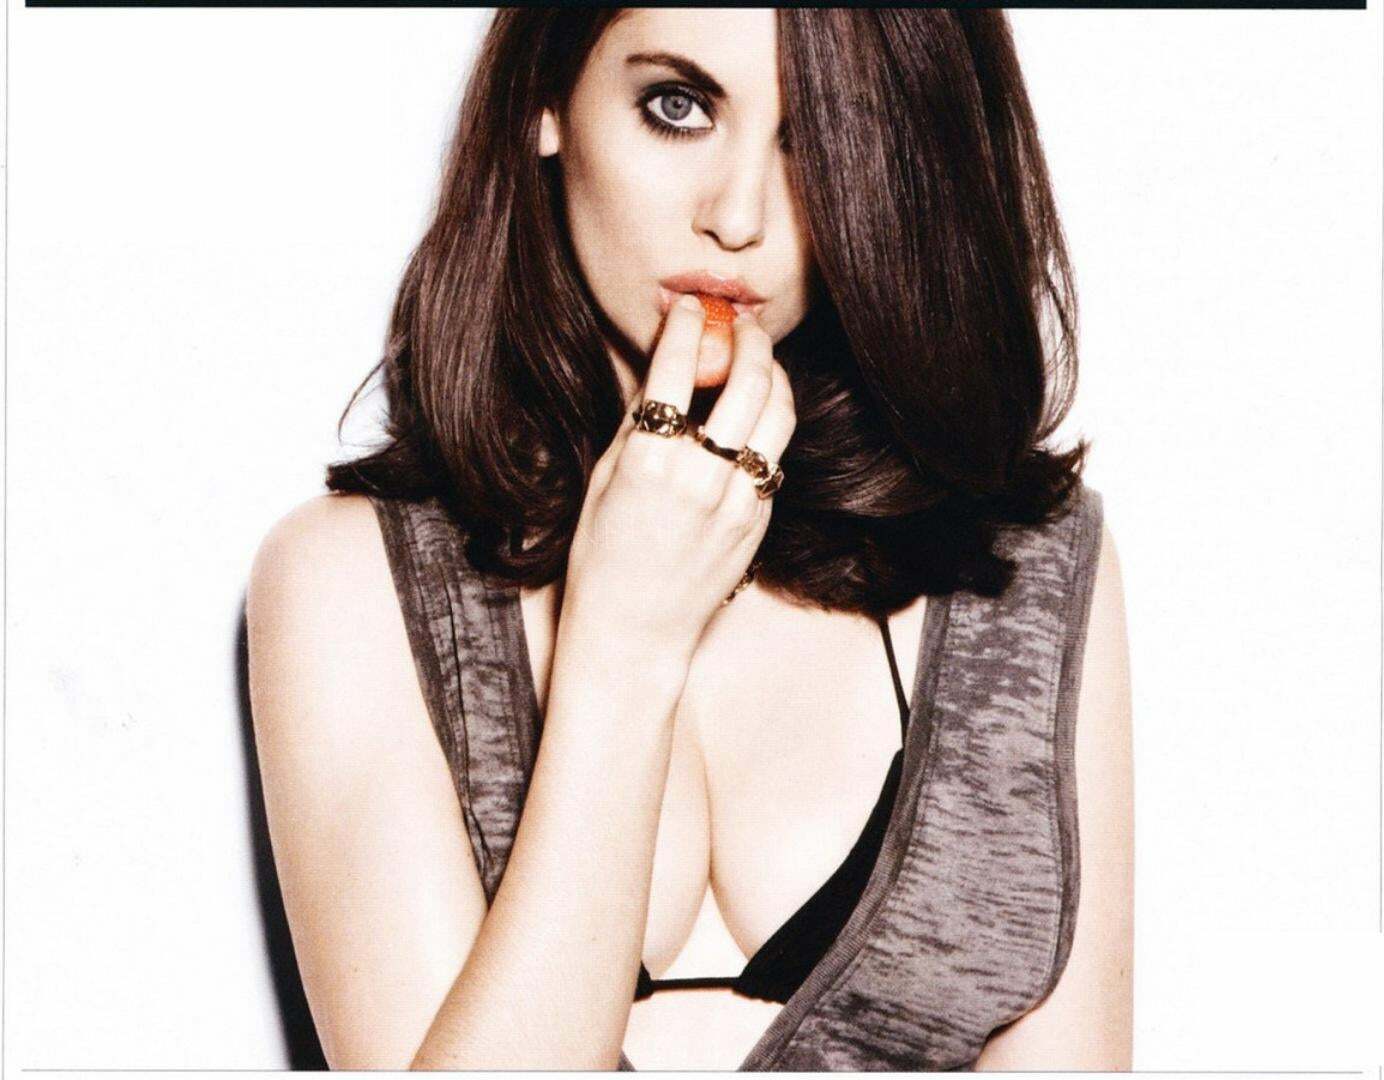 Only Alison Brie can make someone jealous of a strawberry